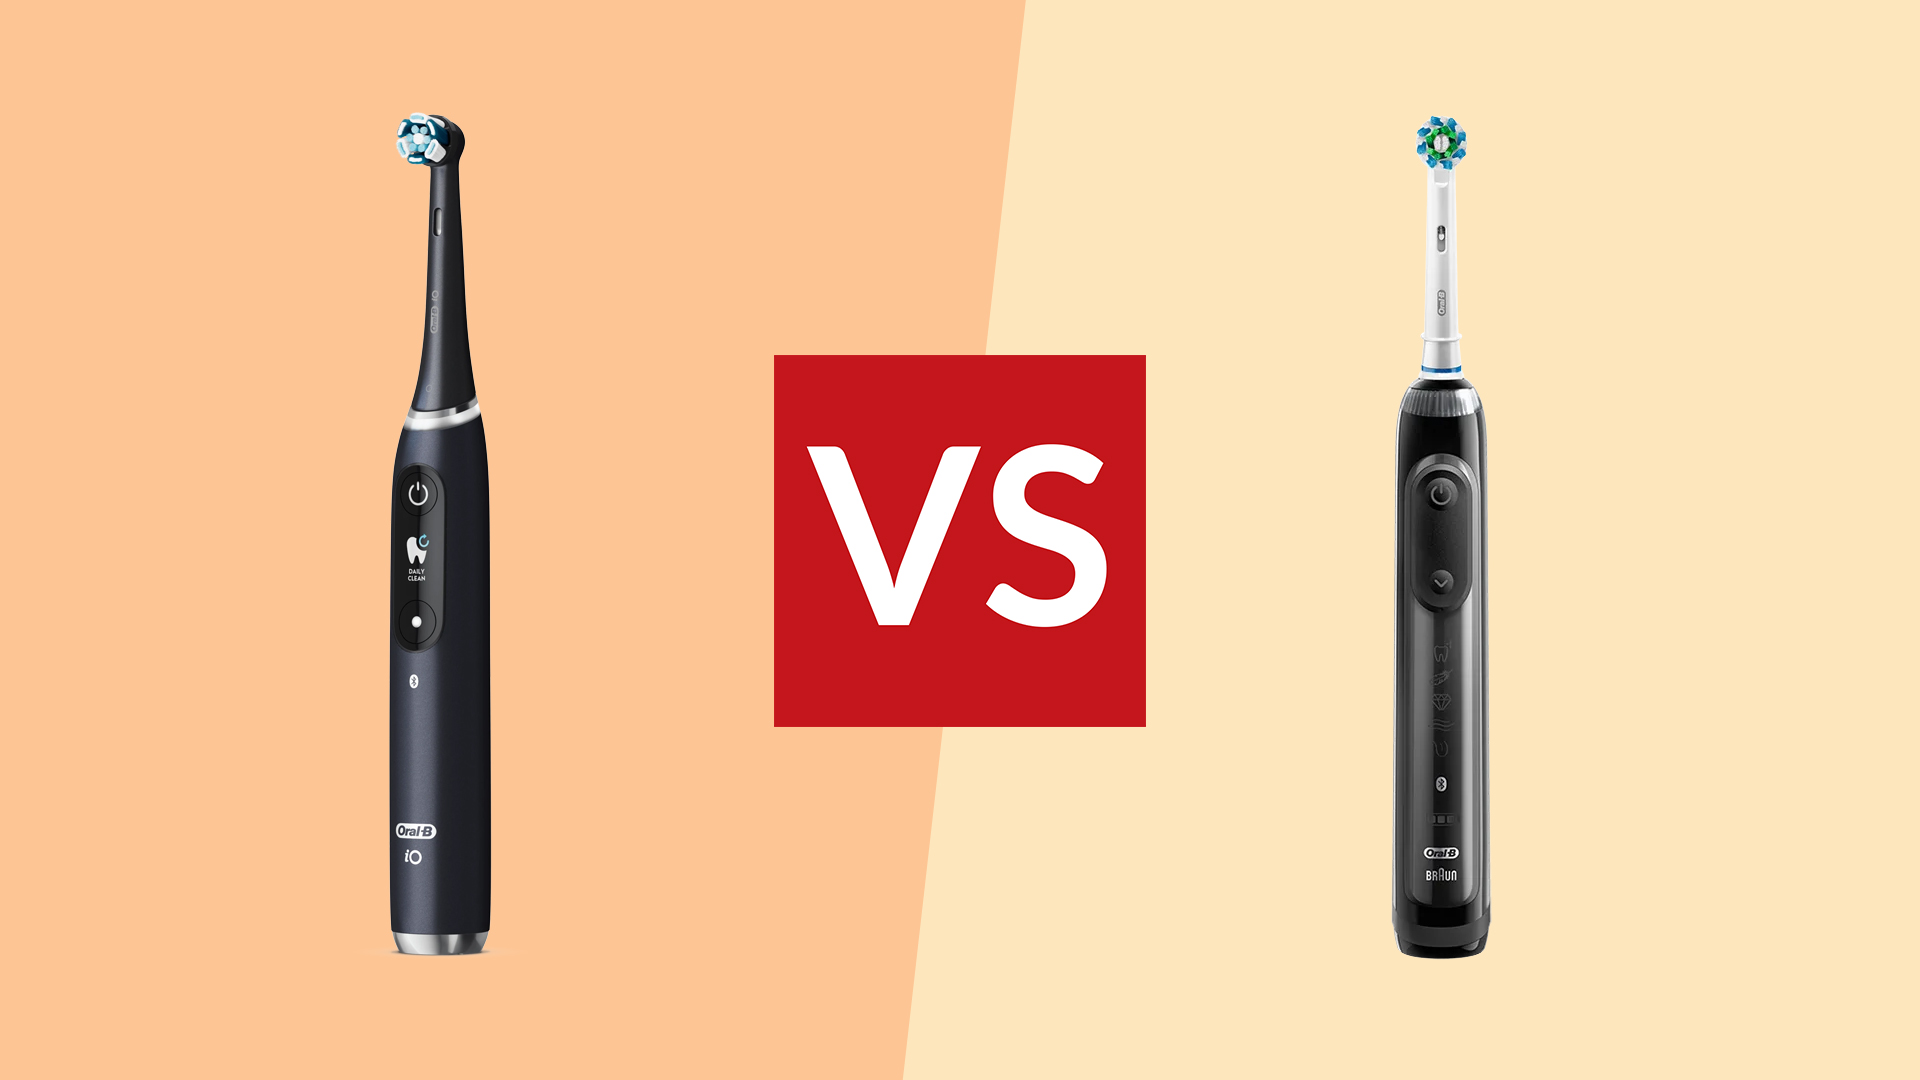 Oral-B iO Series 9 vs Oral-B Genius 9000: which is the top electric  toothbrush?